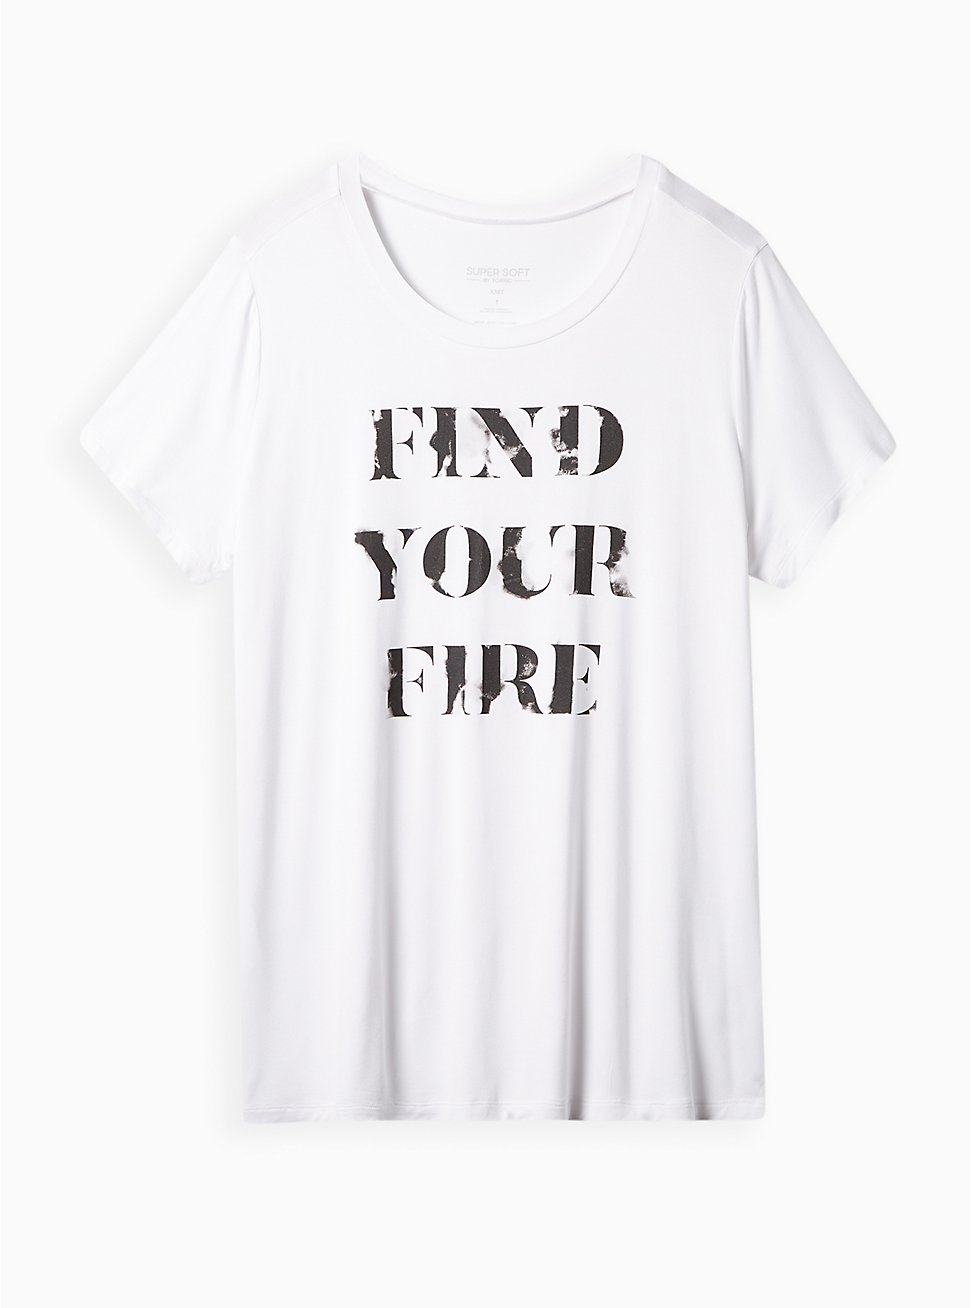 Perfect Tee - Super Soft Find Your Fire White, BRIGHT WHITE, hi-res